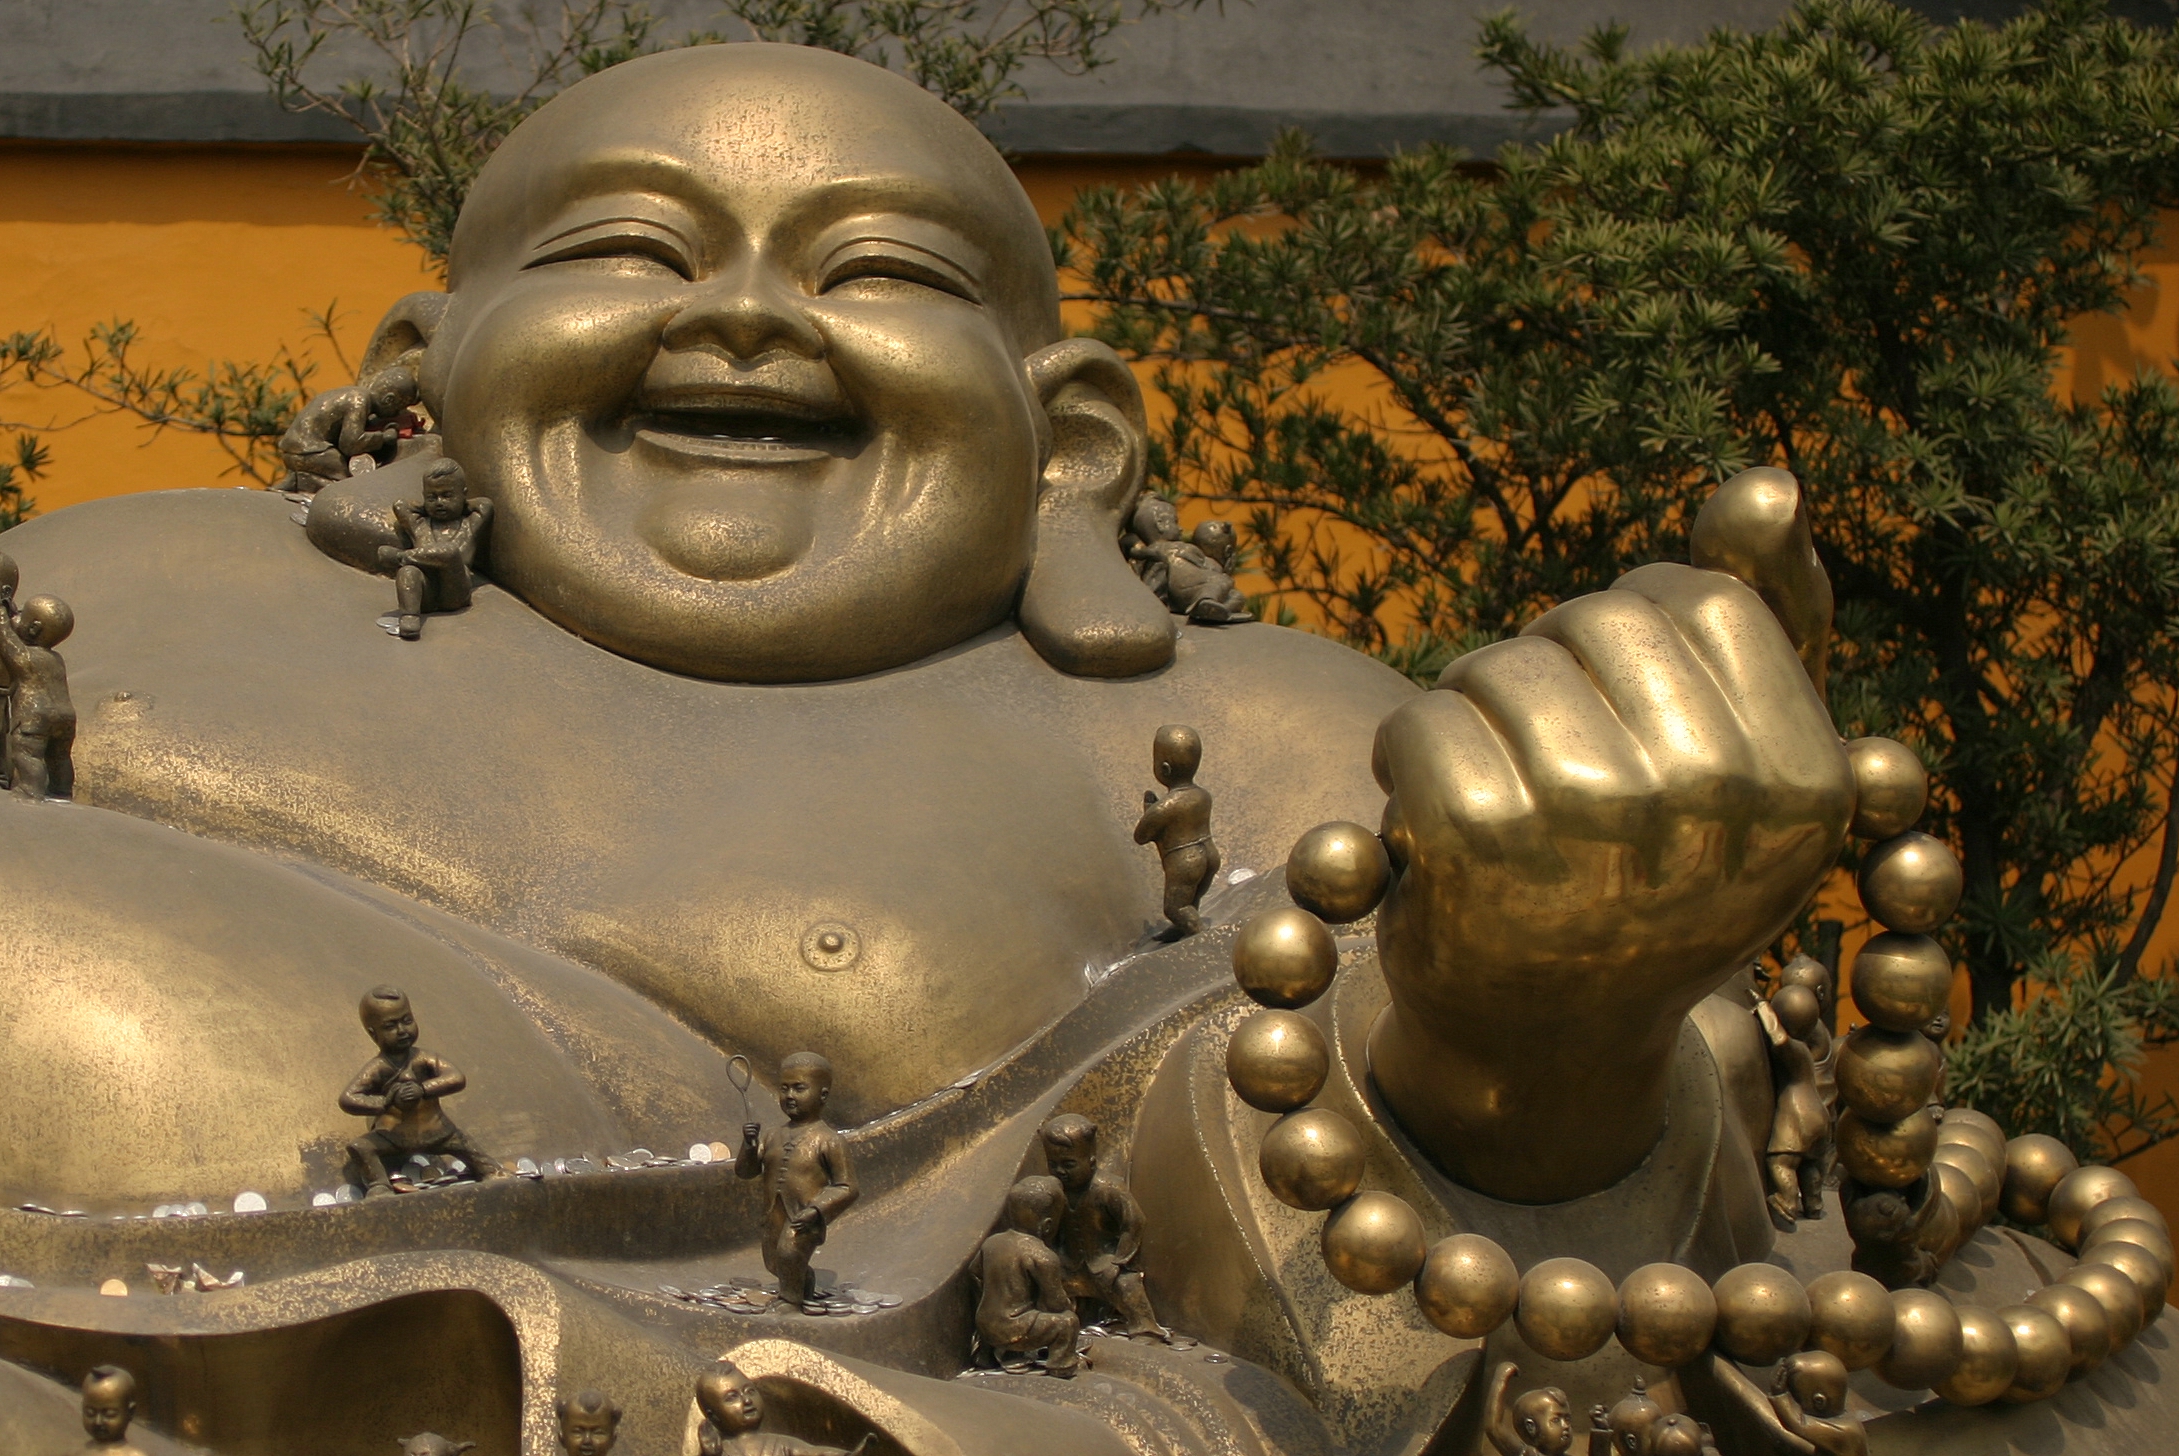 a large metal statue of a laughing buddha